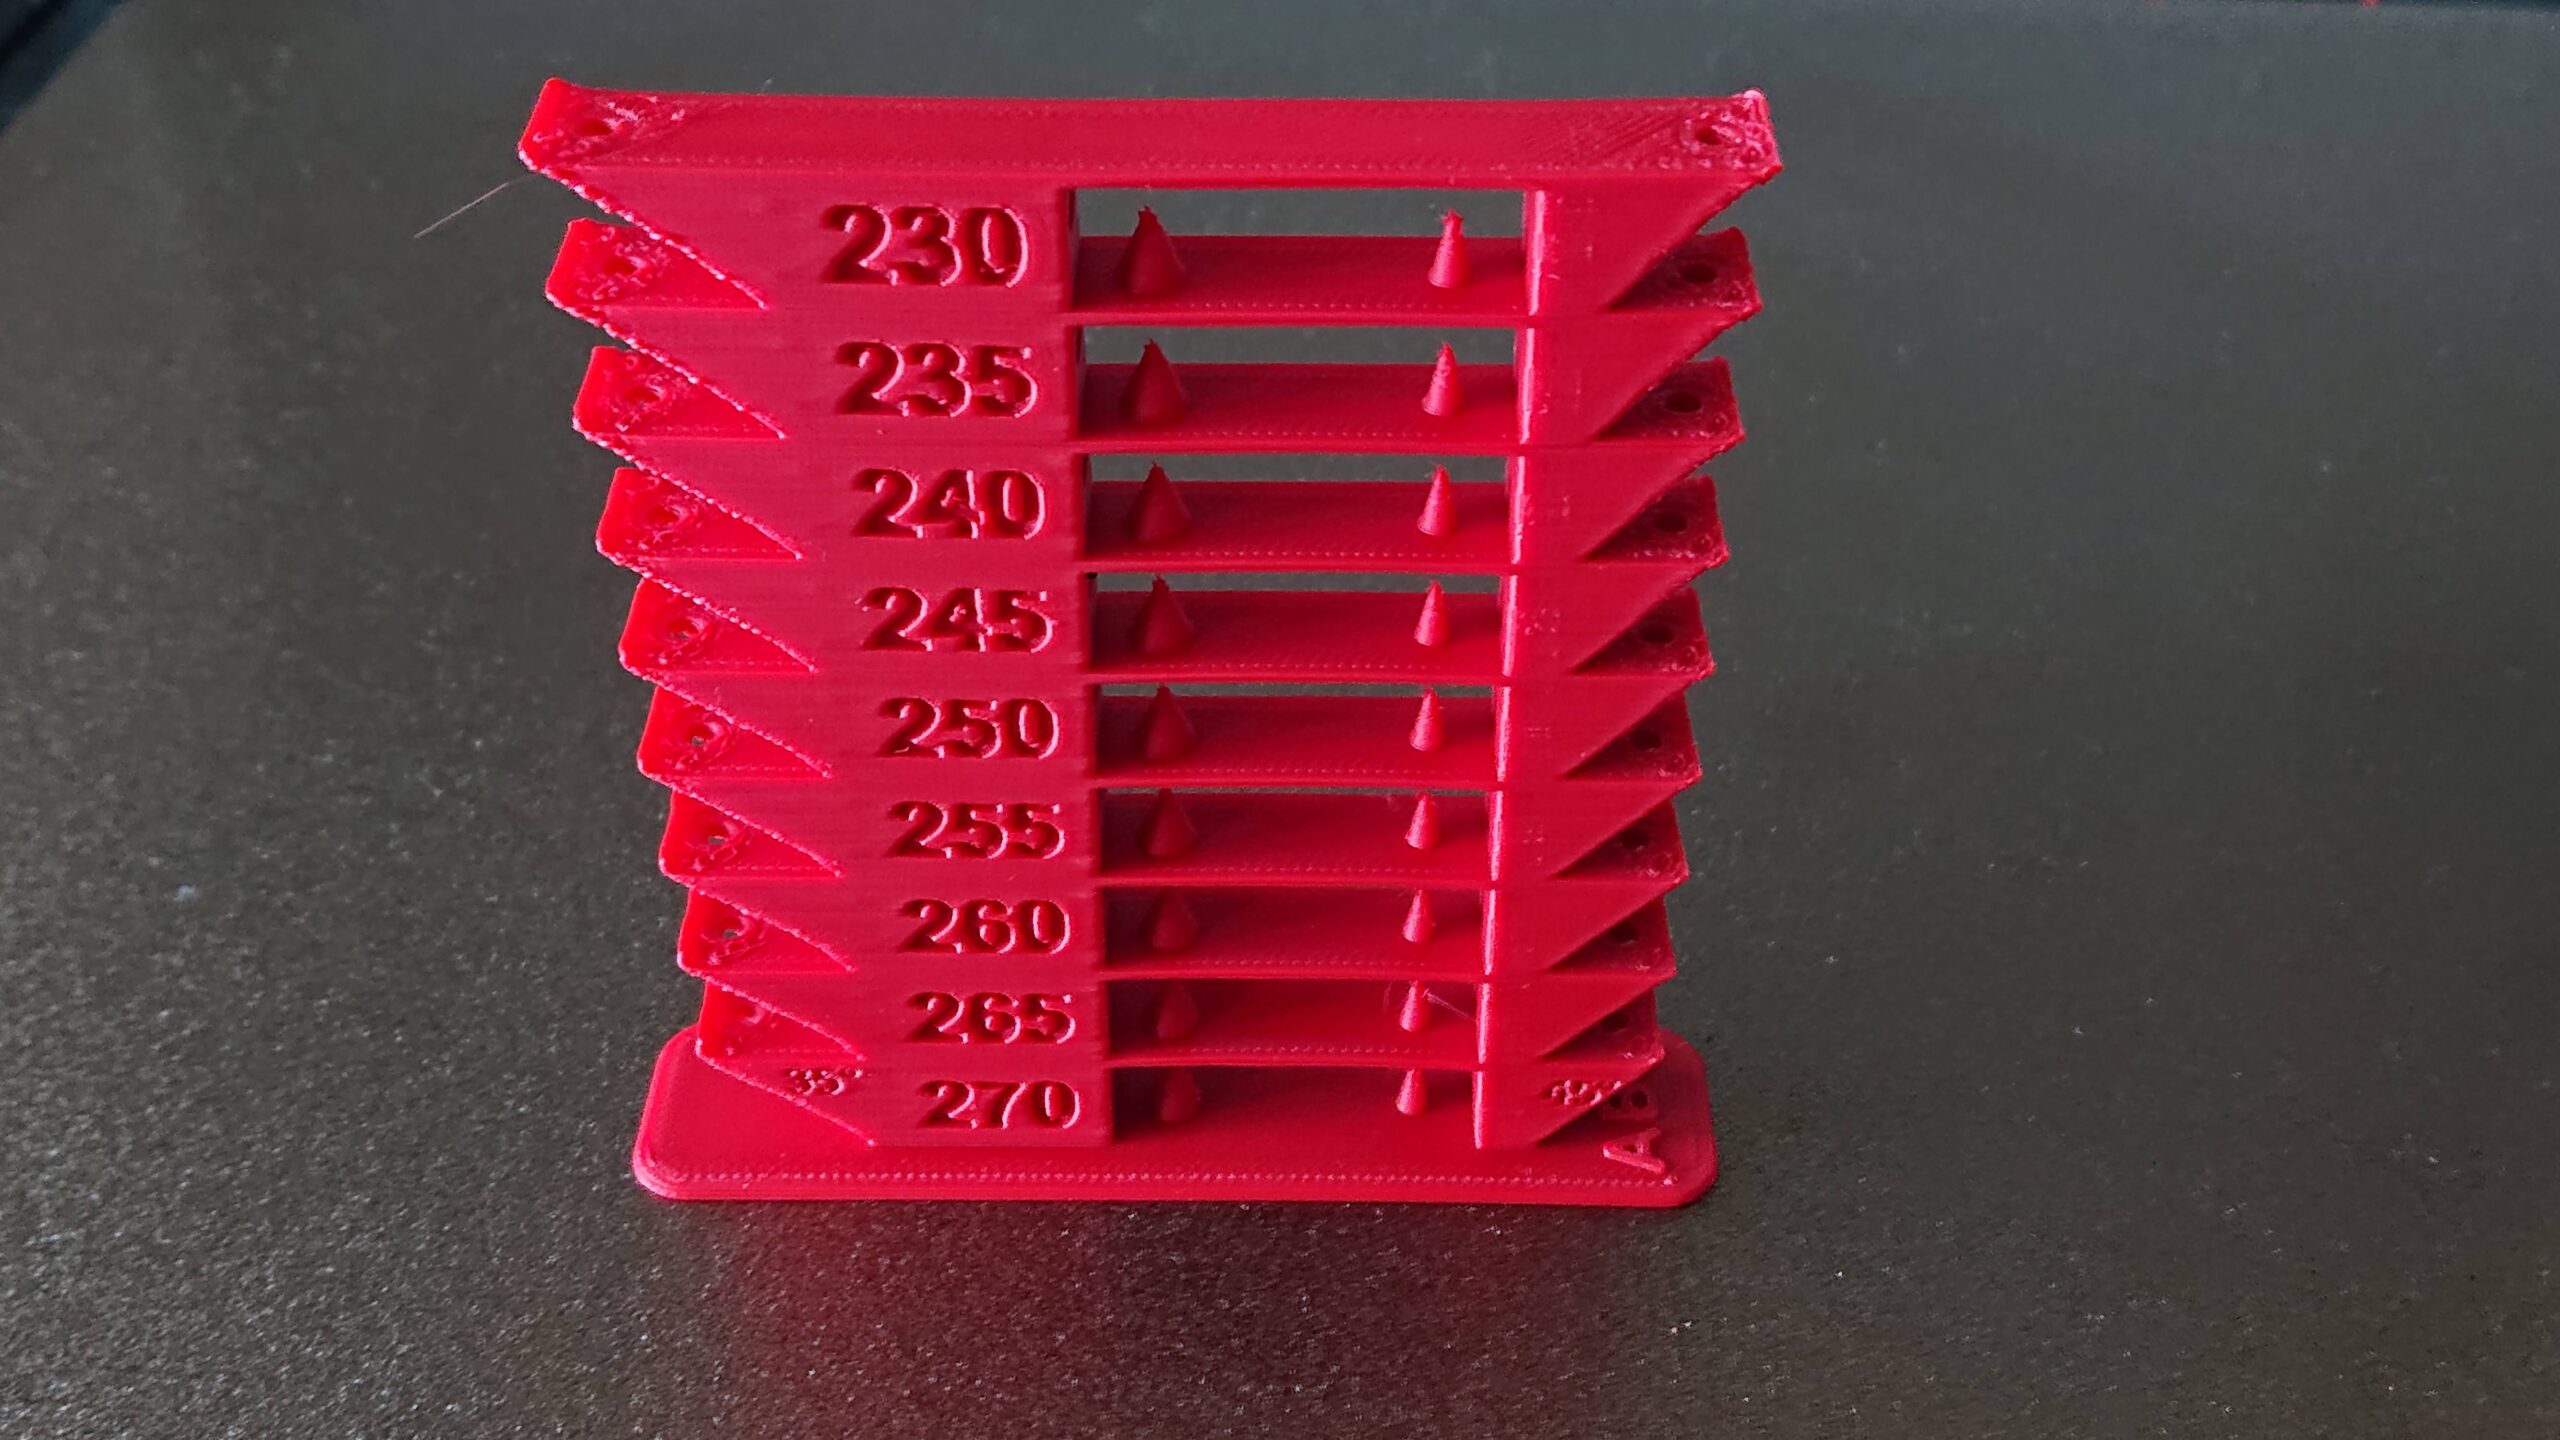 How to prevent overhangs printing first? – PrusaSlicer – Prusa3D Forum